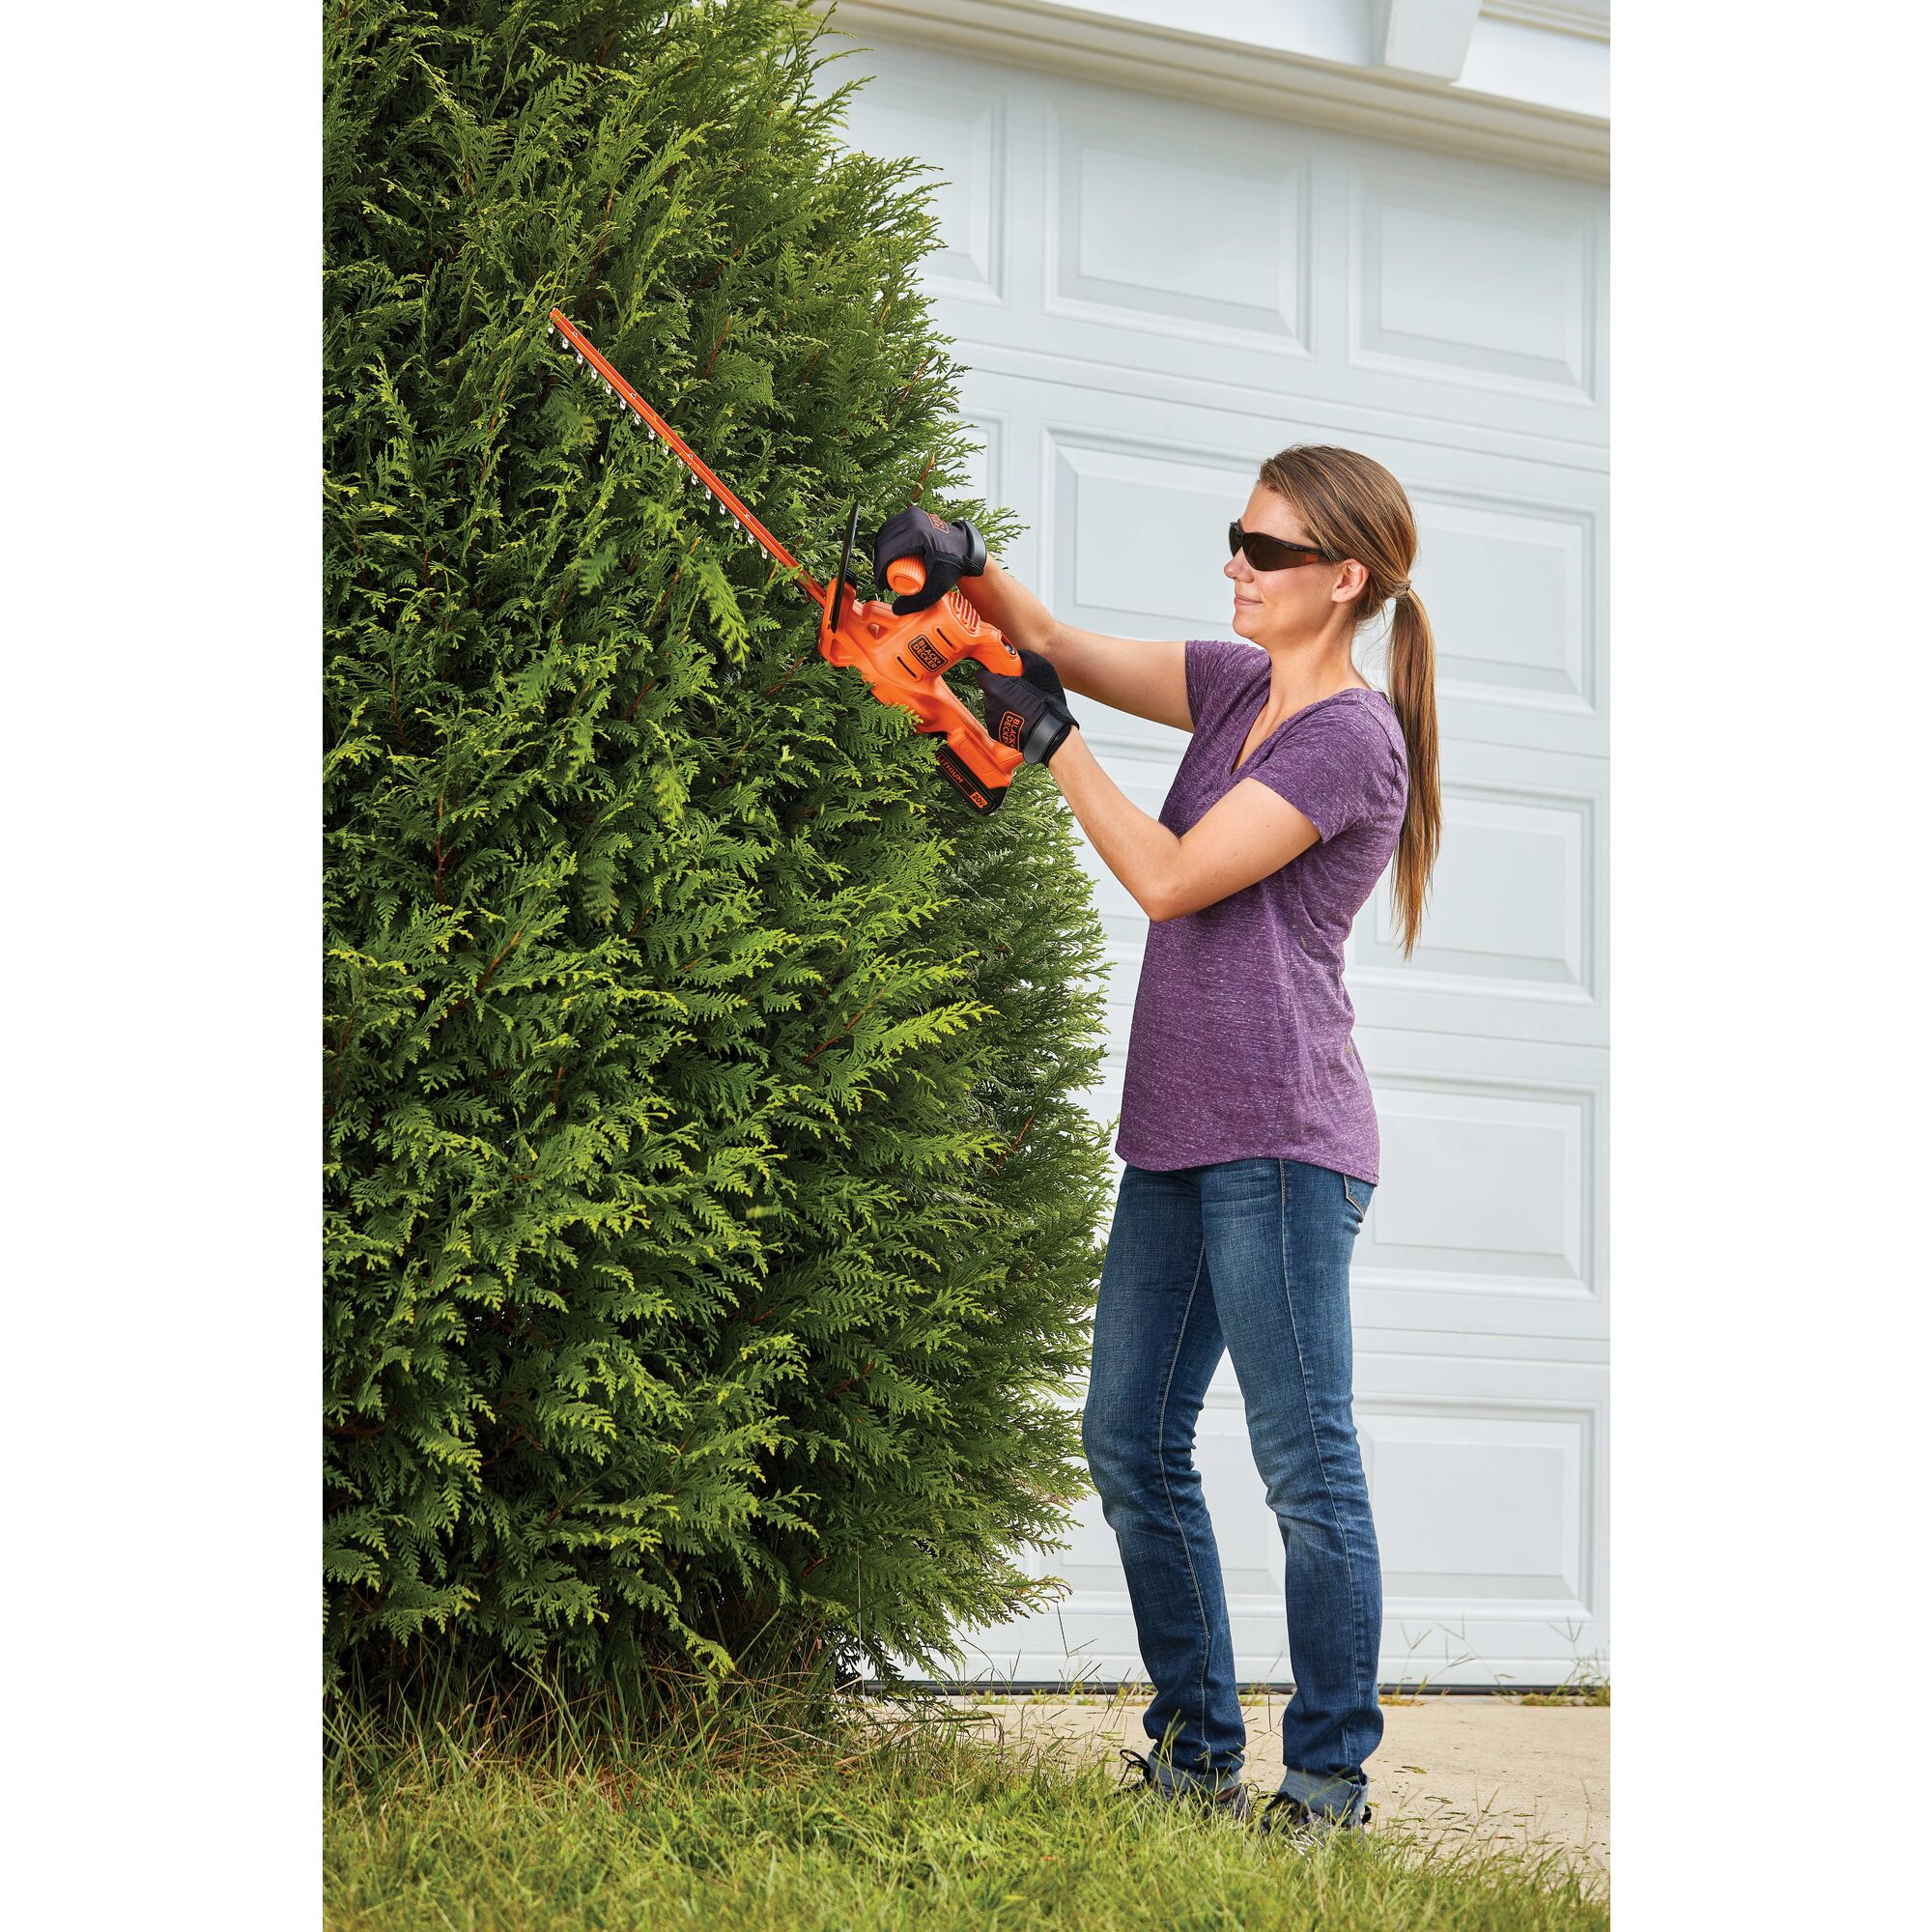 Cordless hedge trimmer being used by a person to trim bushes.\r\n